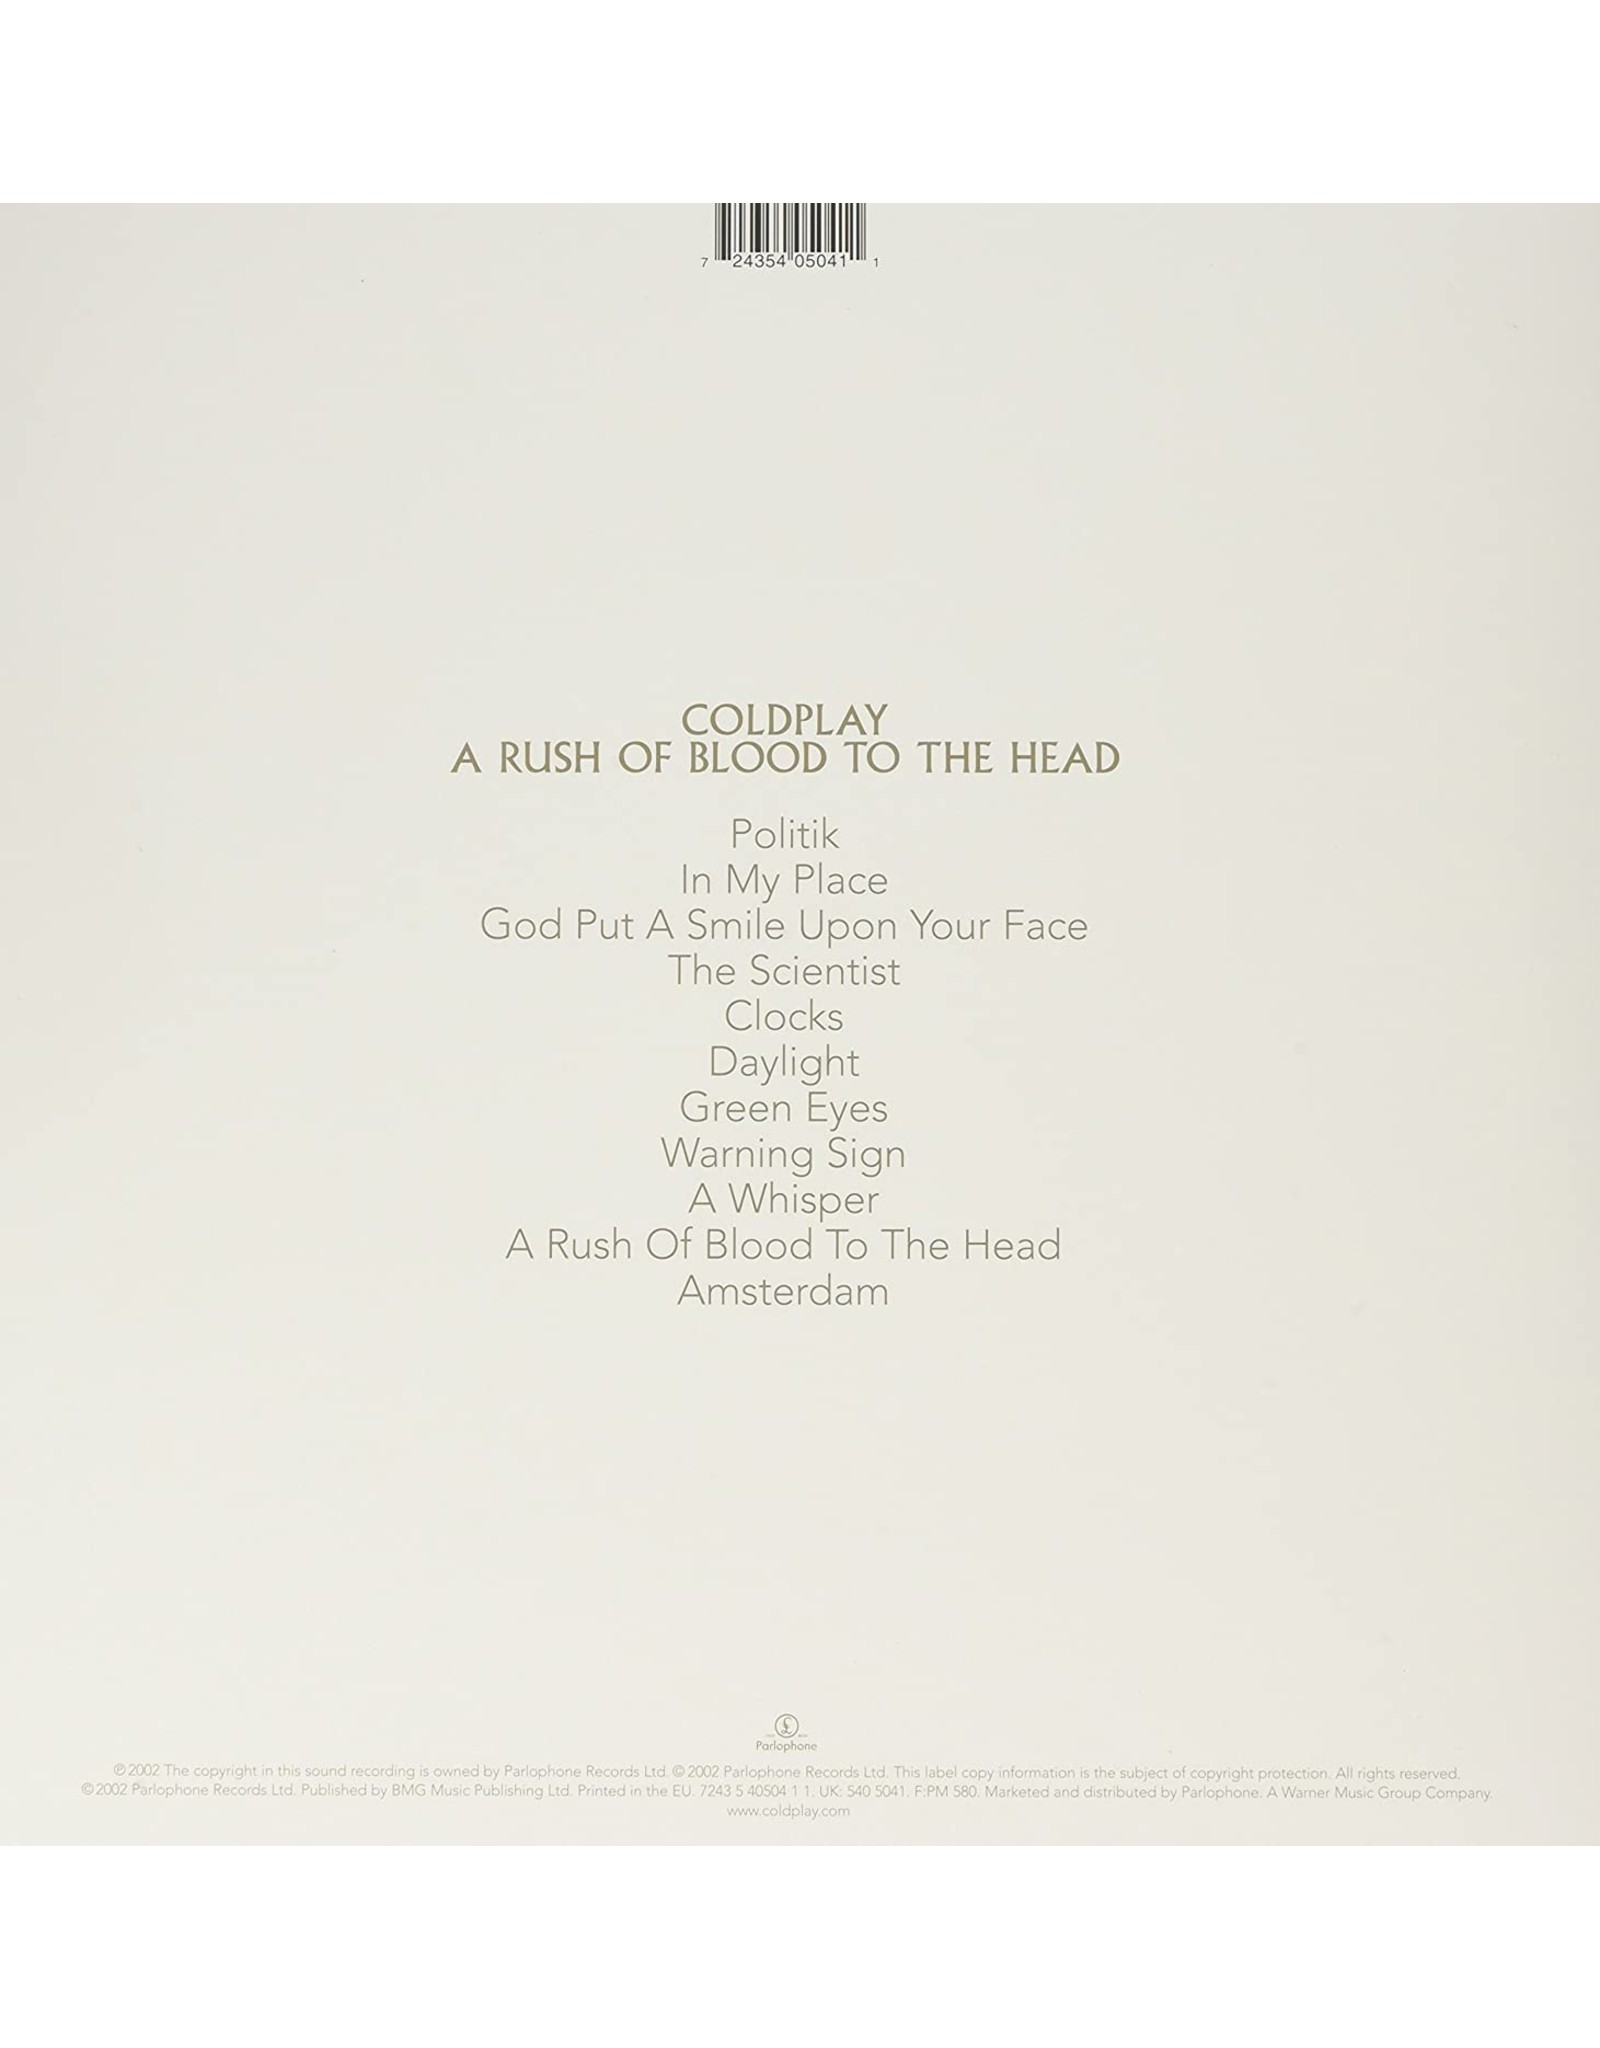  A Rush of Blood to the Head: CDs y Vinilo